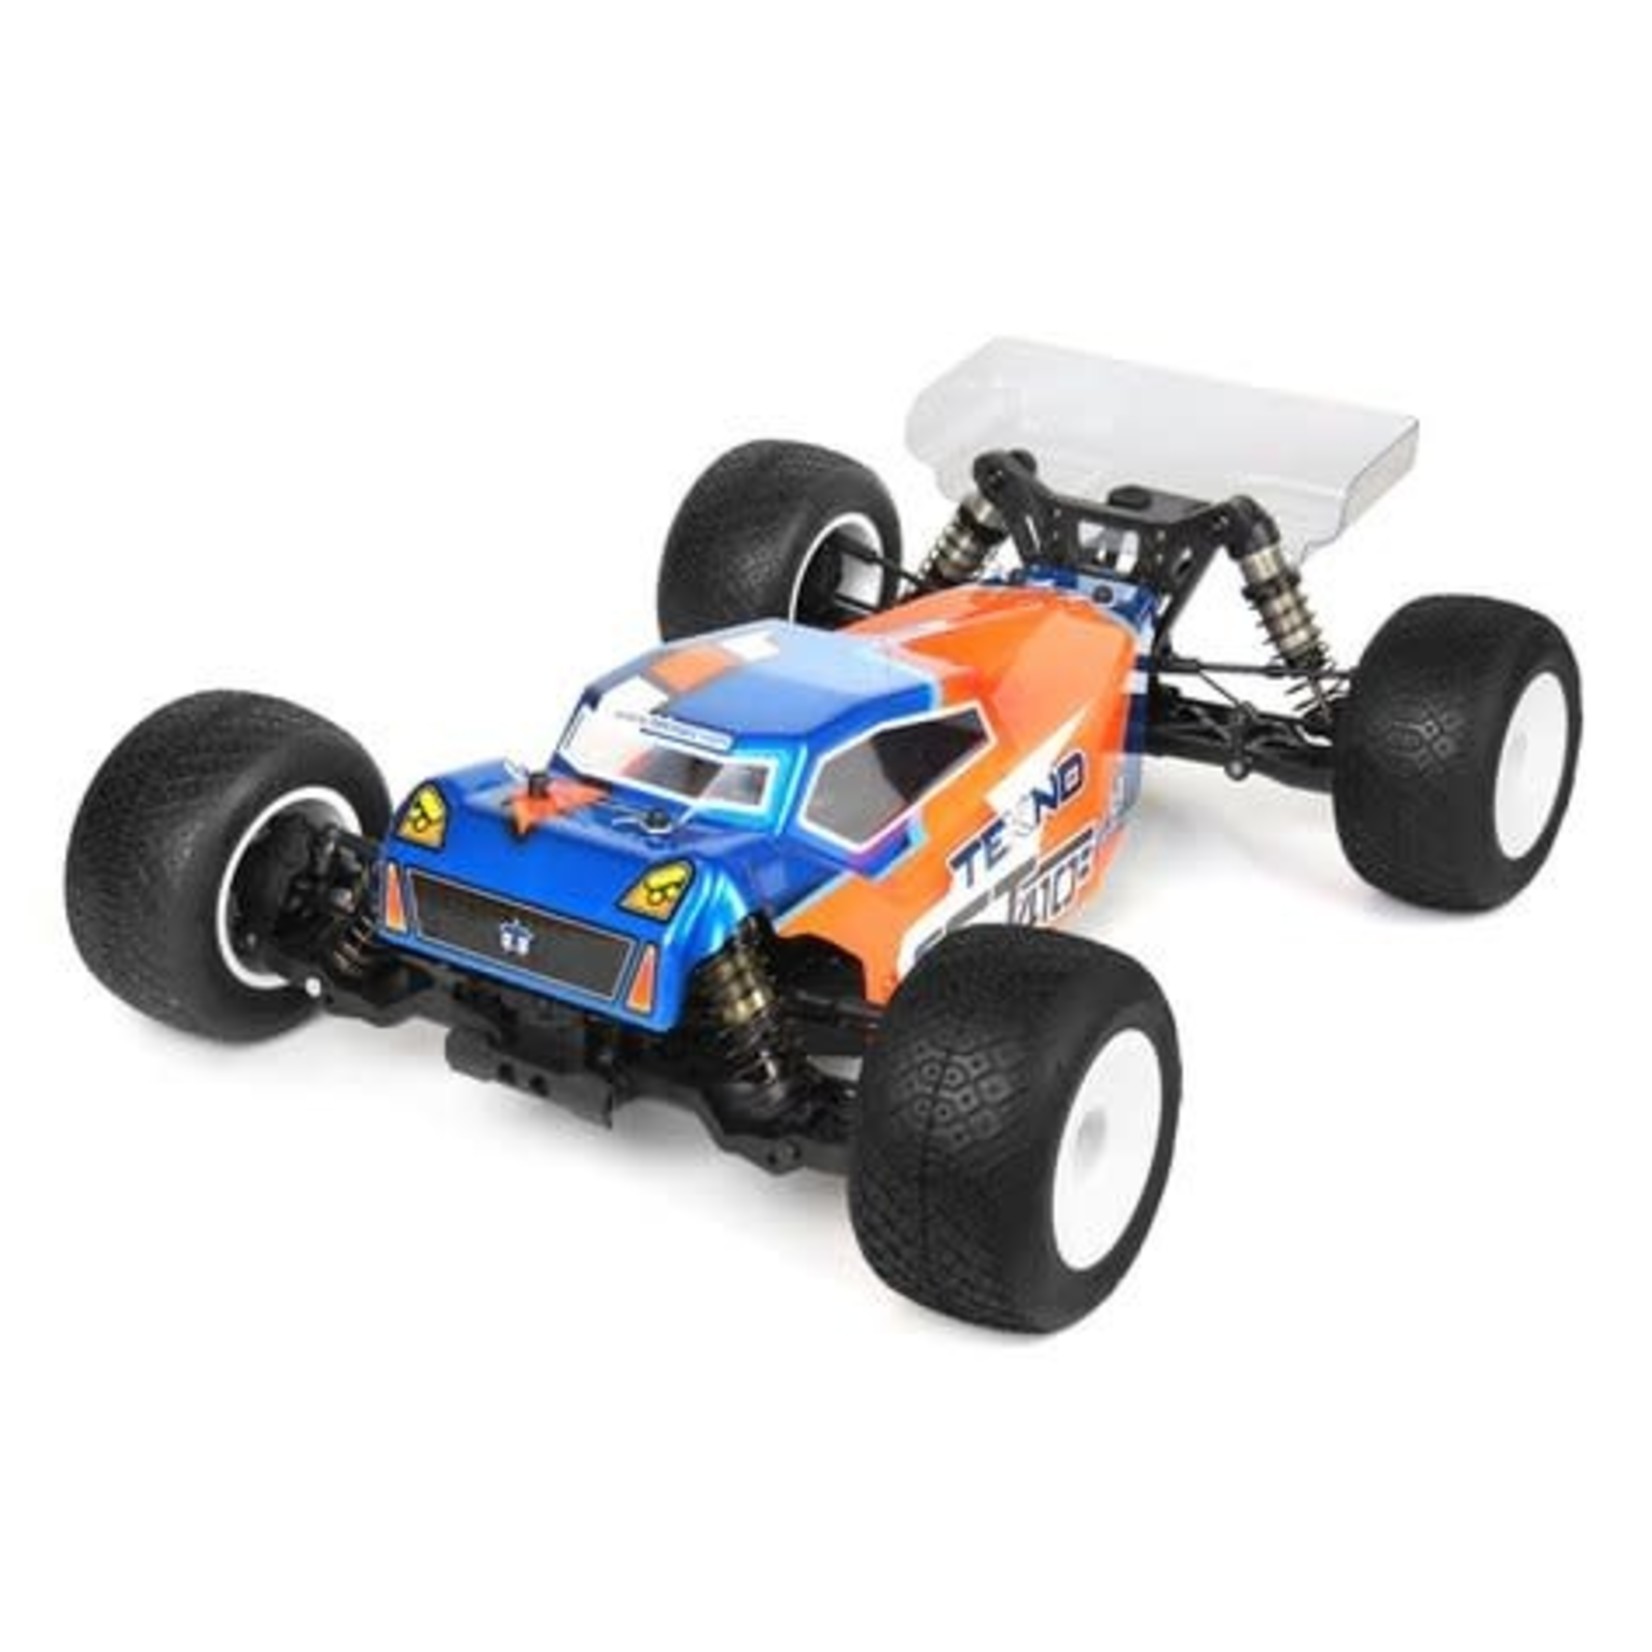 Tekno RC Tekno RC ET410.2 Competition 1/10 Electric 4WD Truggy Kit #TKR7202